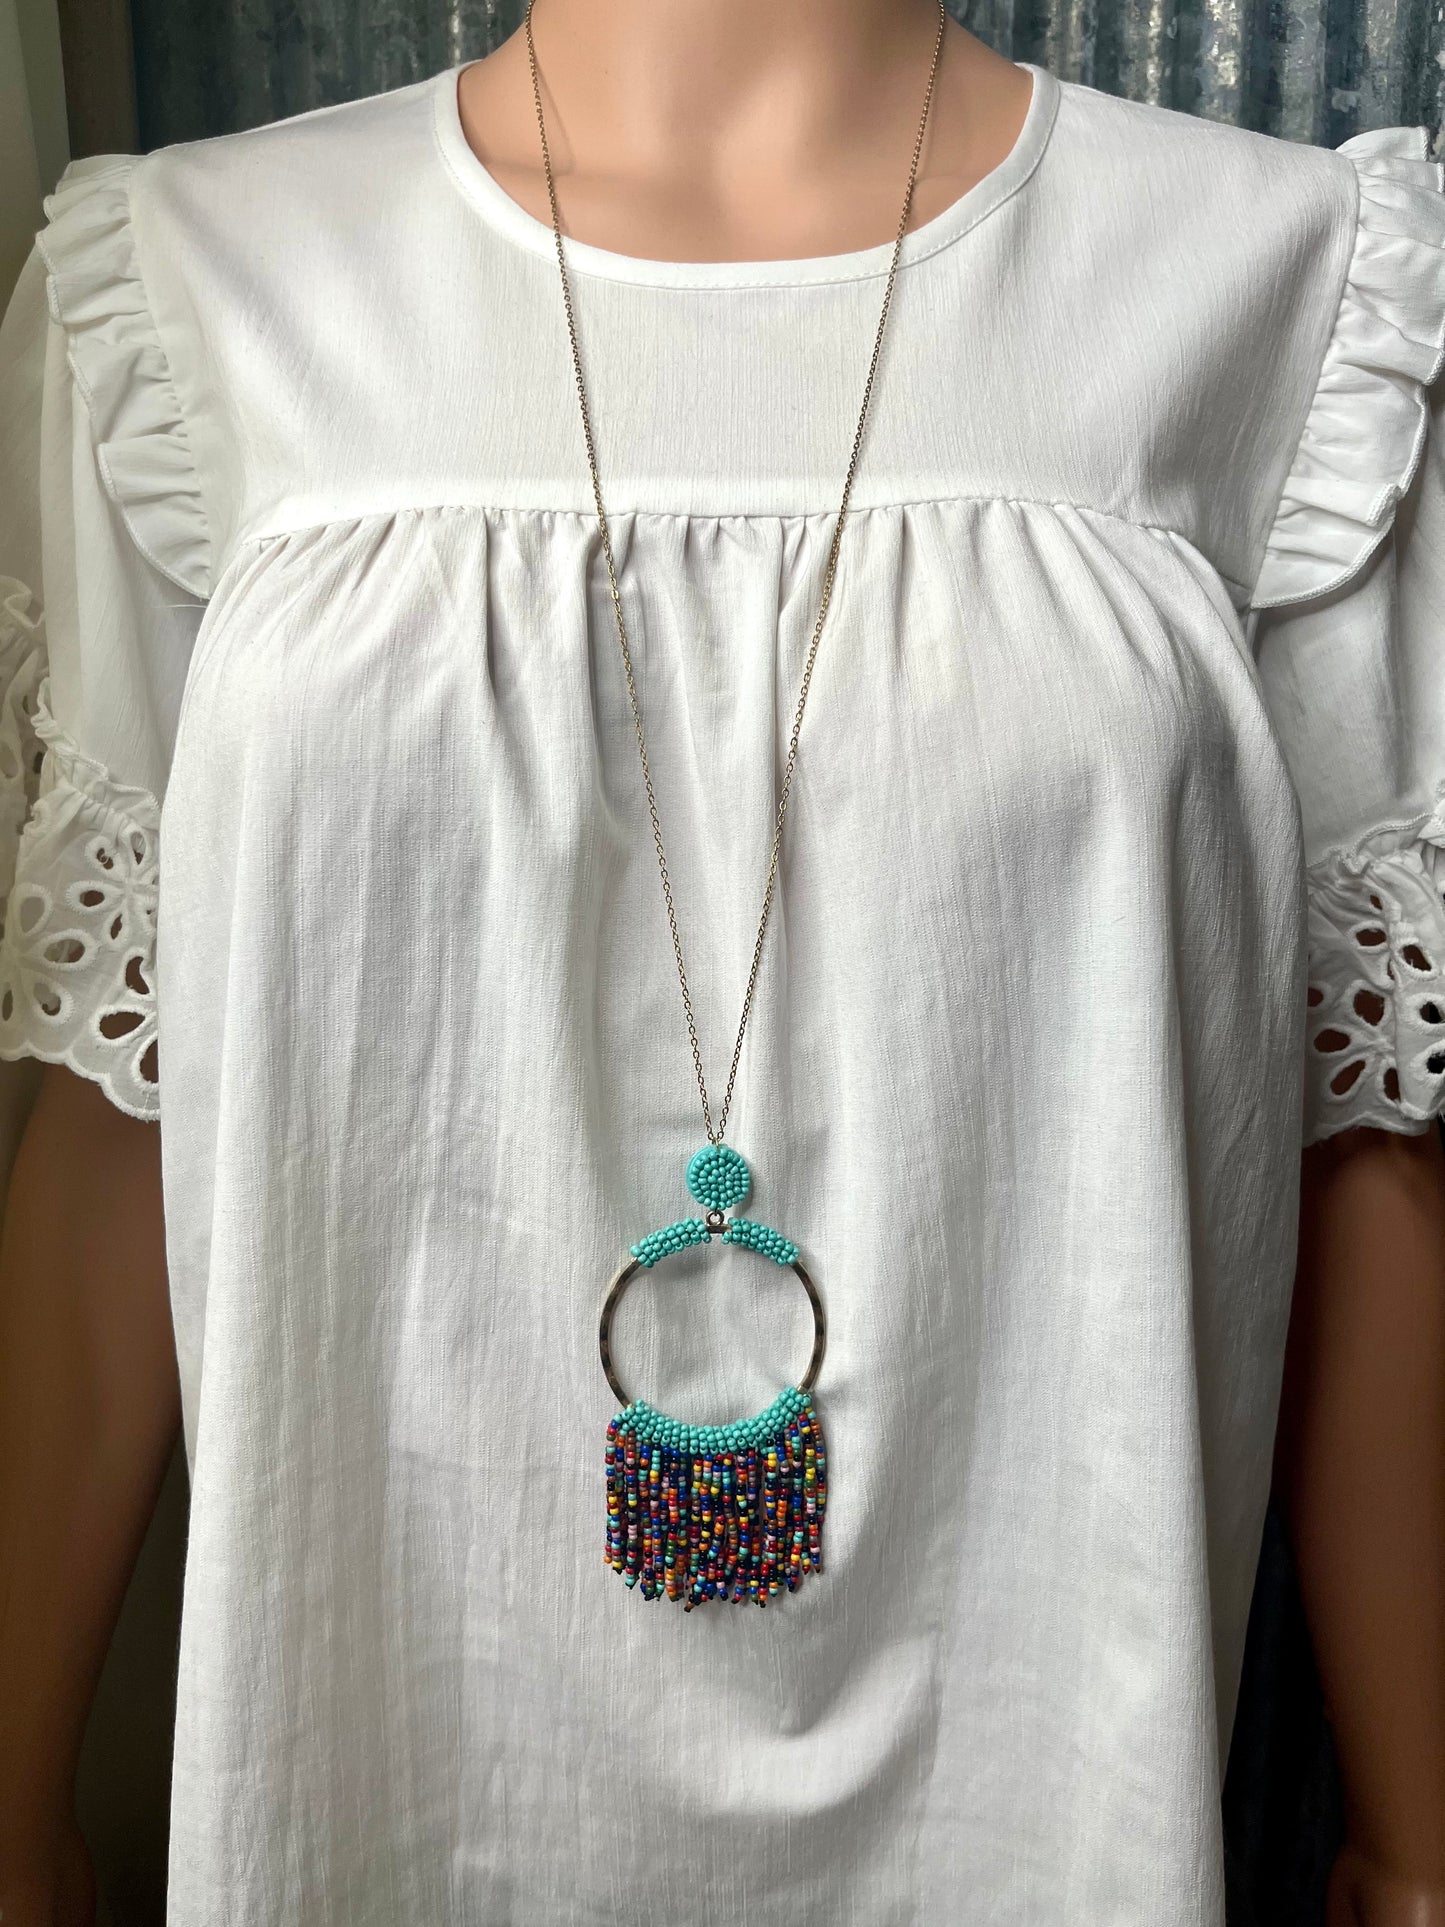 Teal Beaded Necklace with Multi Fringe